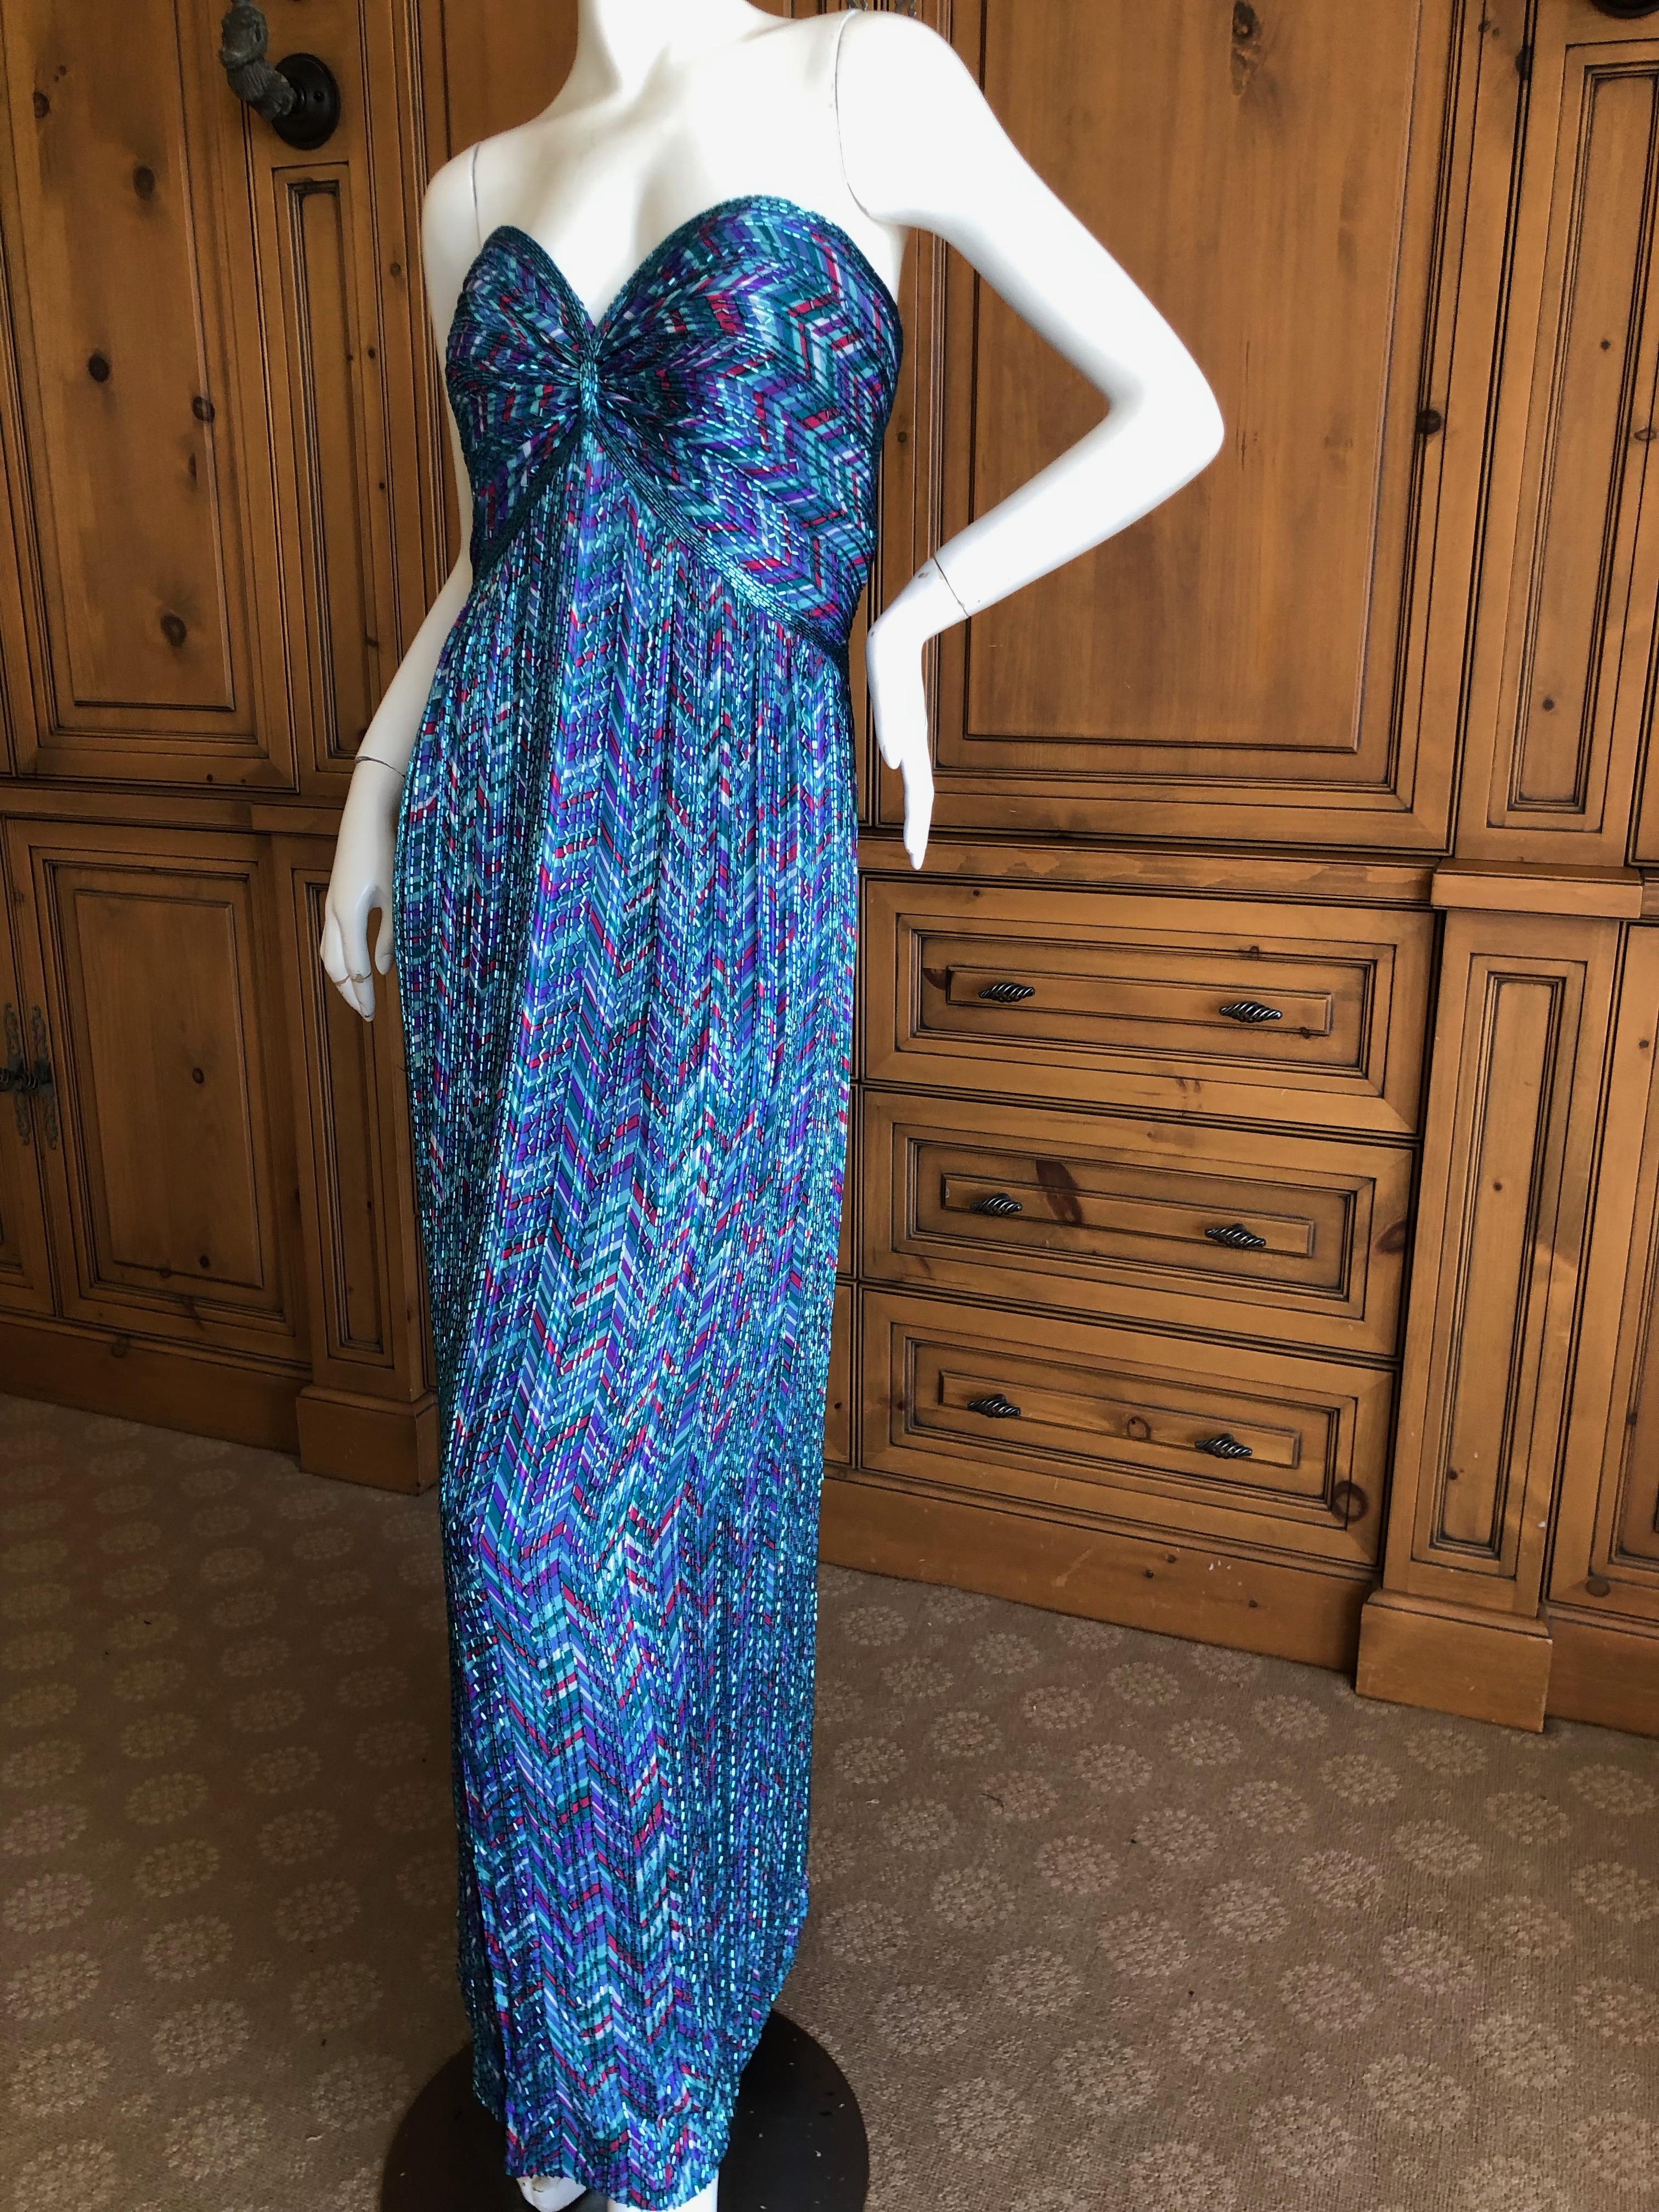 Bob Mackie Vintage 70's Strapless Bugle Beaded Embellished Silk Evening Dress.
So much prettier than the photos, please use zoom feature to see details.
Size 12
Bust 36